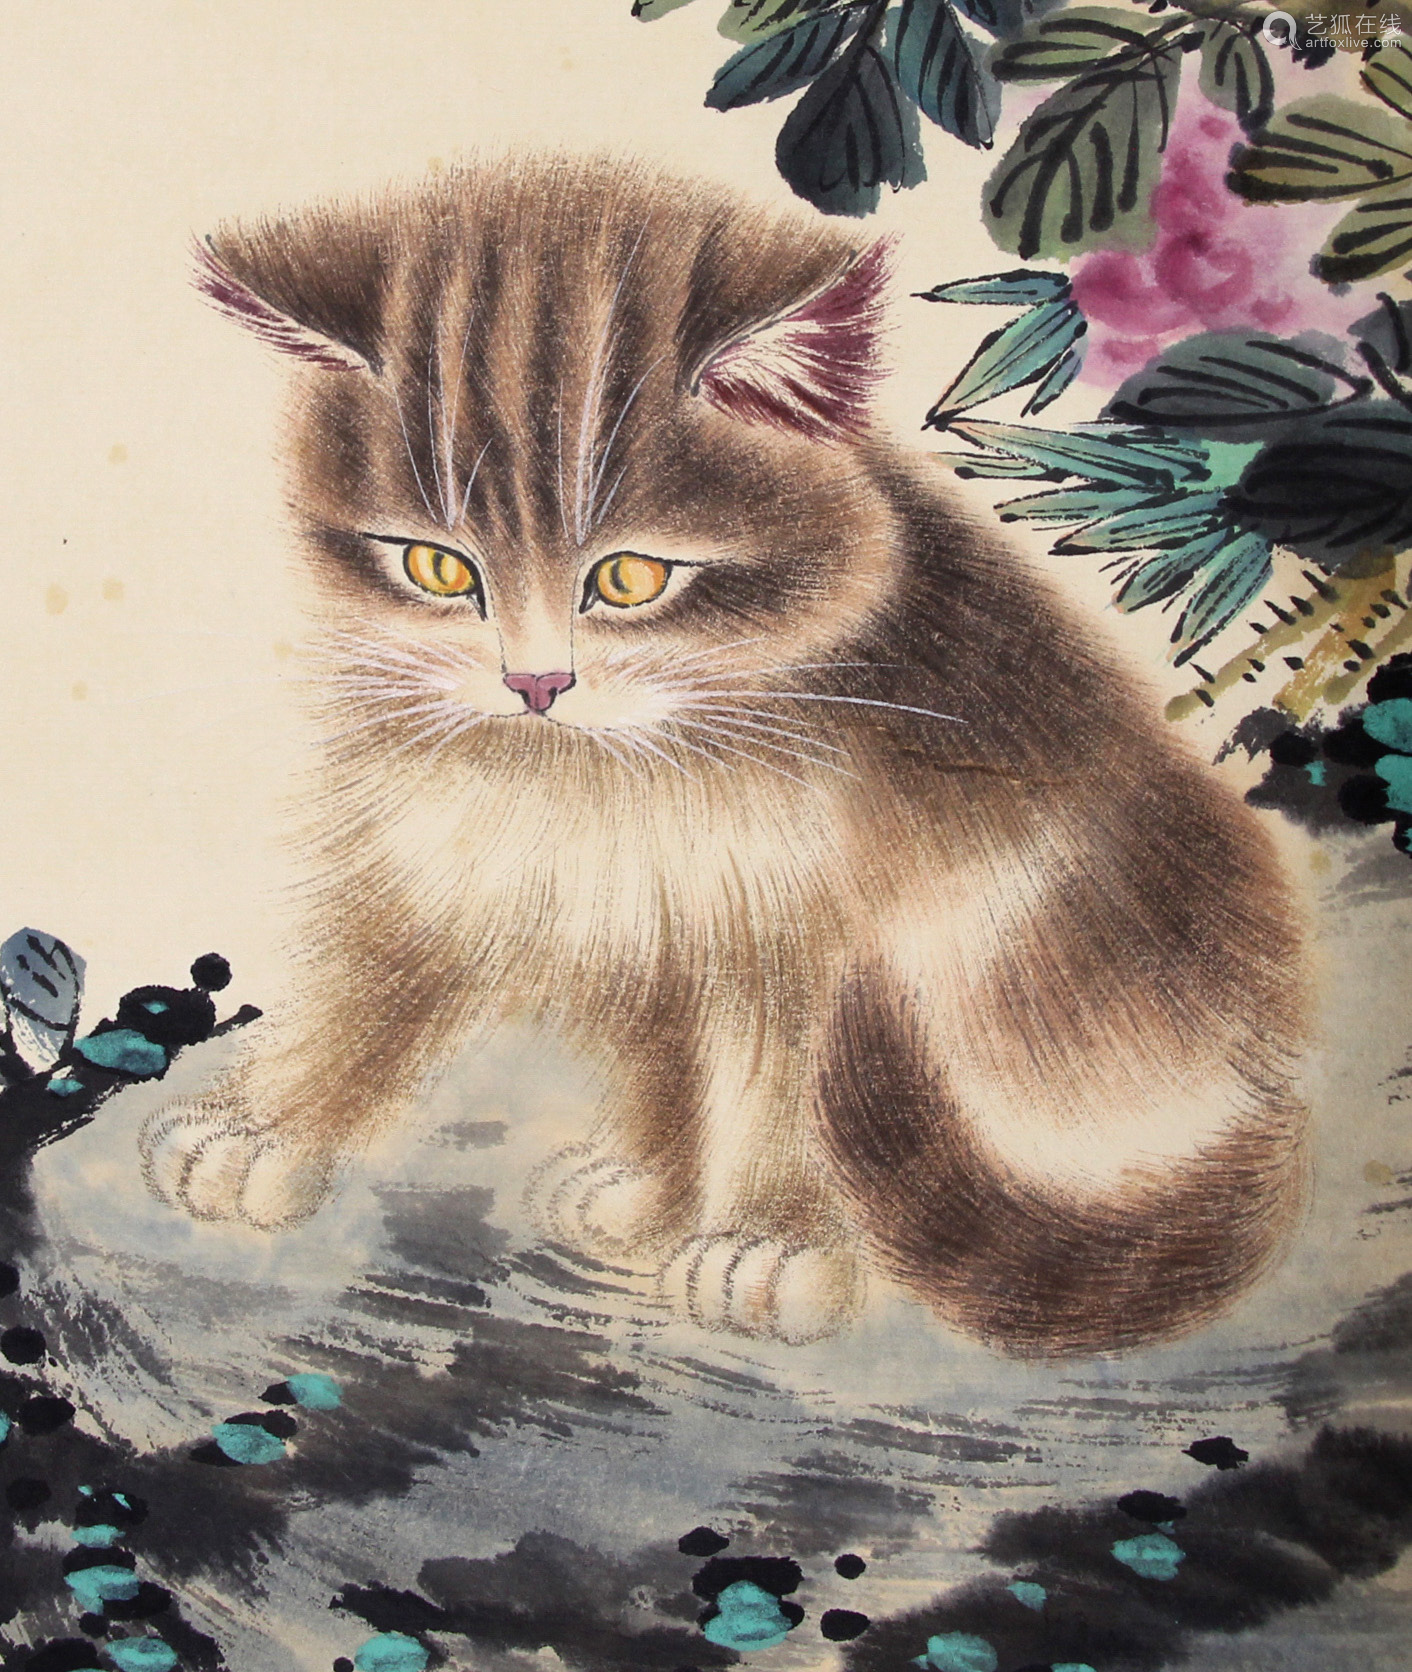 Chinese ink painting, 
Cao Kejia's playing cat drawing